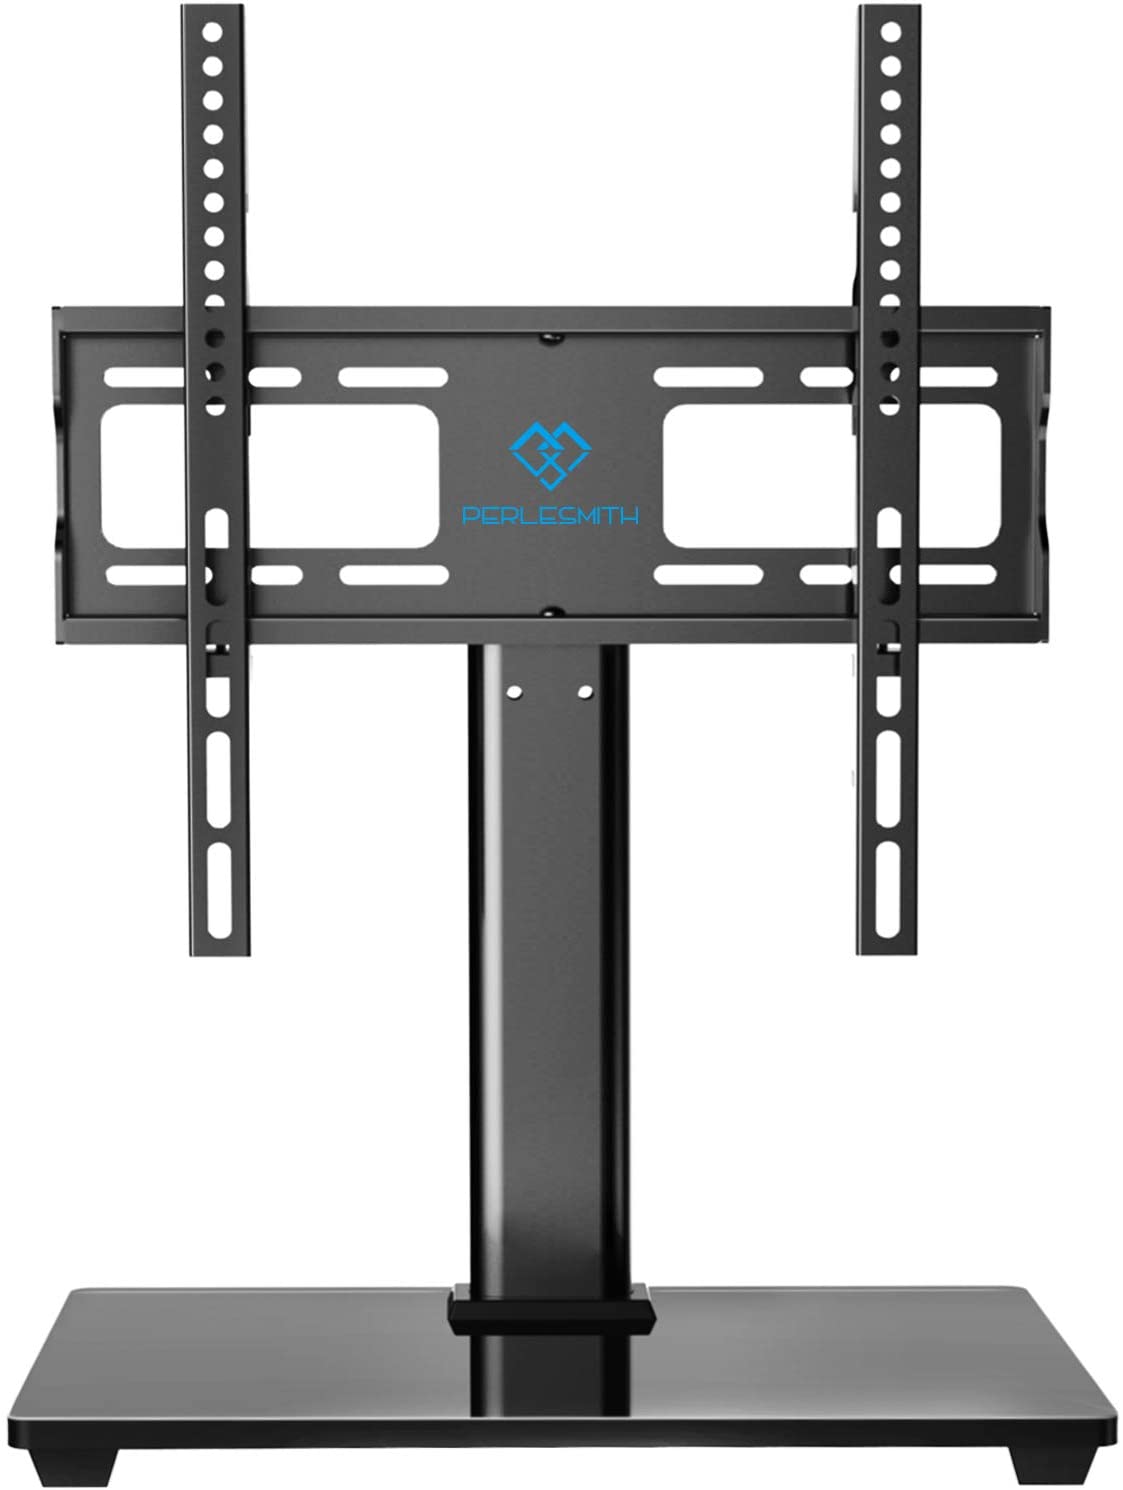 PERLESMITH Swivel Universal TV Stand / Base - Table Top TV Stand for 32-55 inch LCD LED TVs - Height Adjustable TV Mount Stand with Tempered Glass Base, VESA 400x400mm, Holds up to 88lbs - image 1 of 3